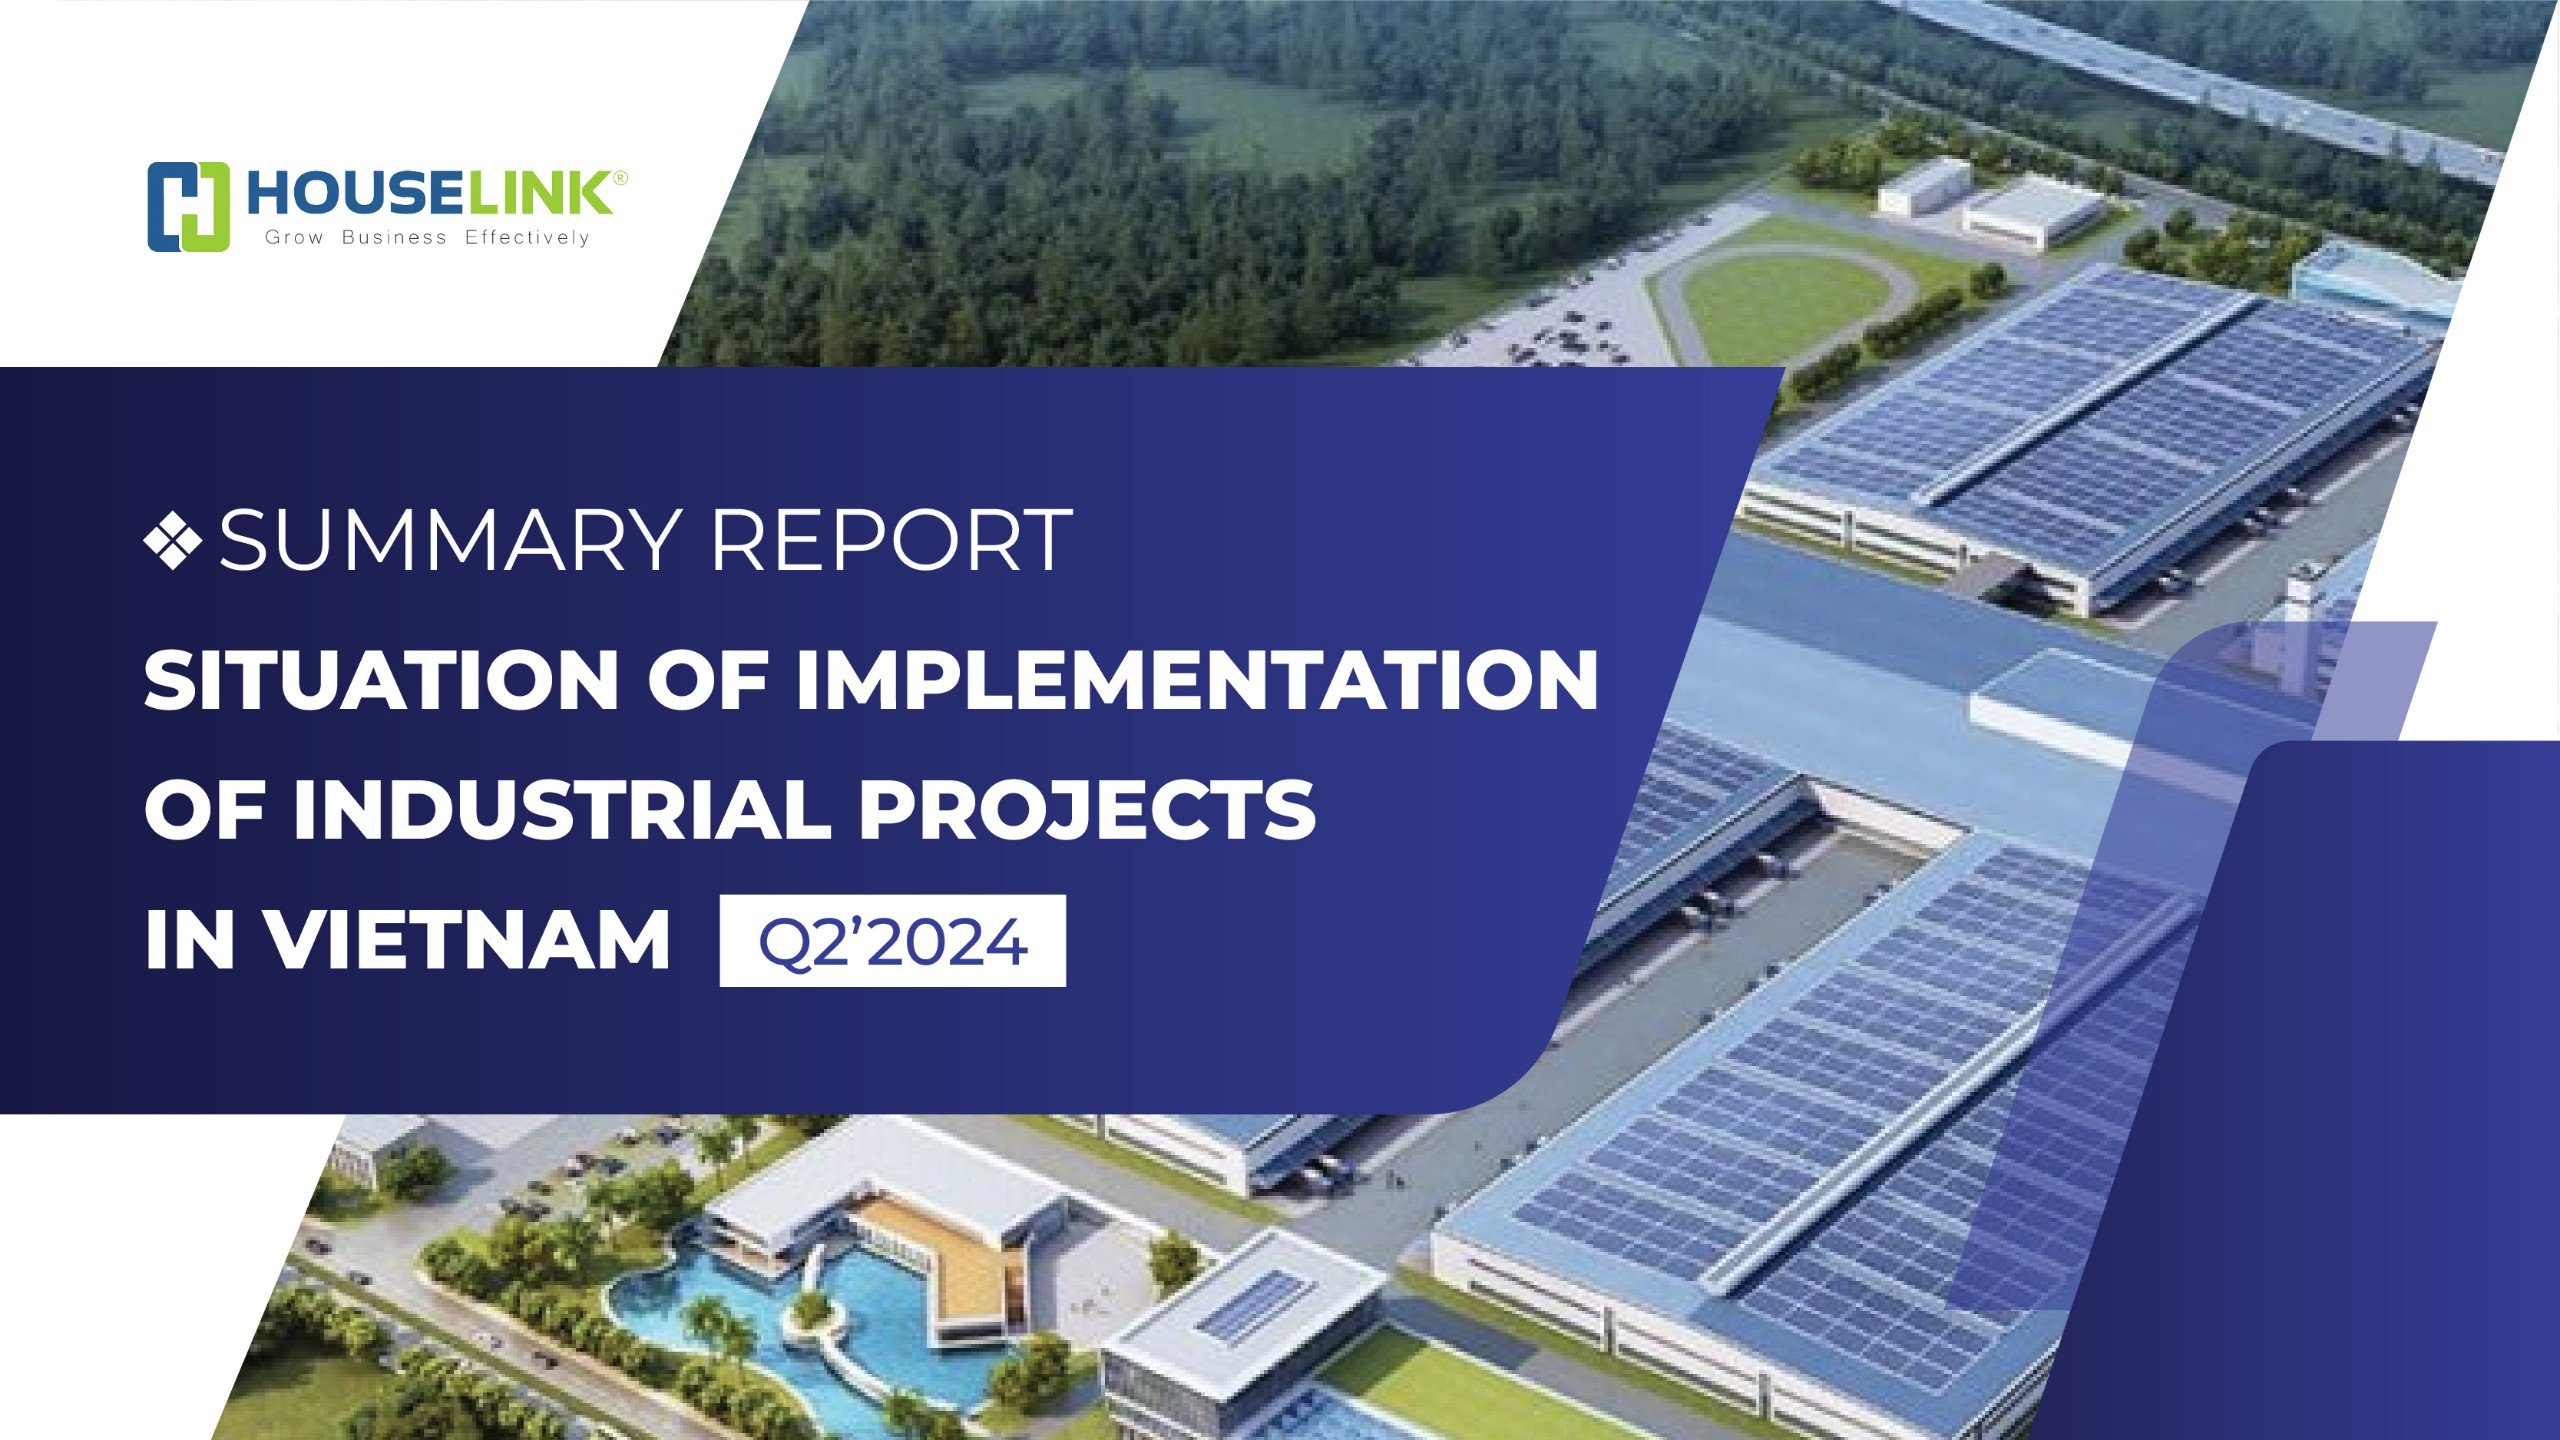 Summary Report Situation Of Implementation Of Industrial Projects In Vietnam Q2’2024